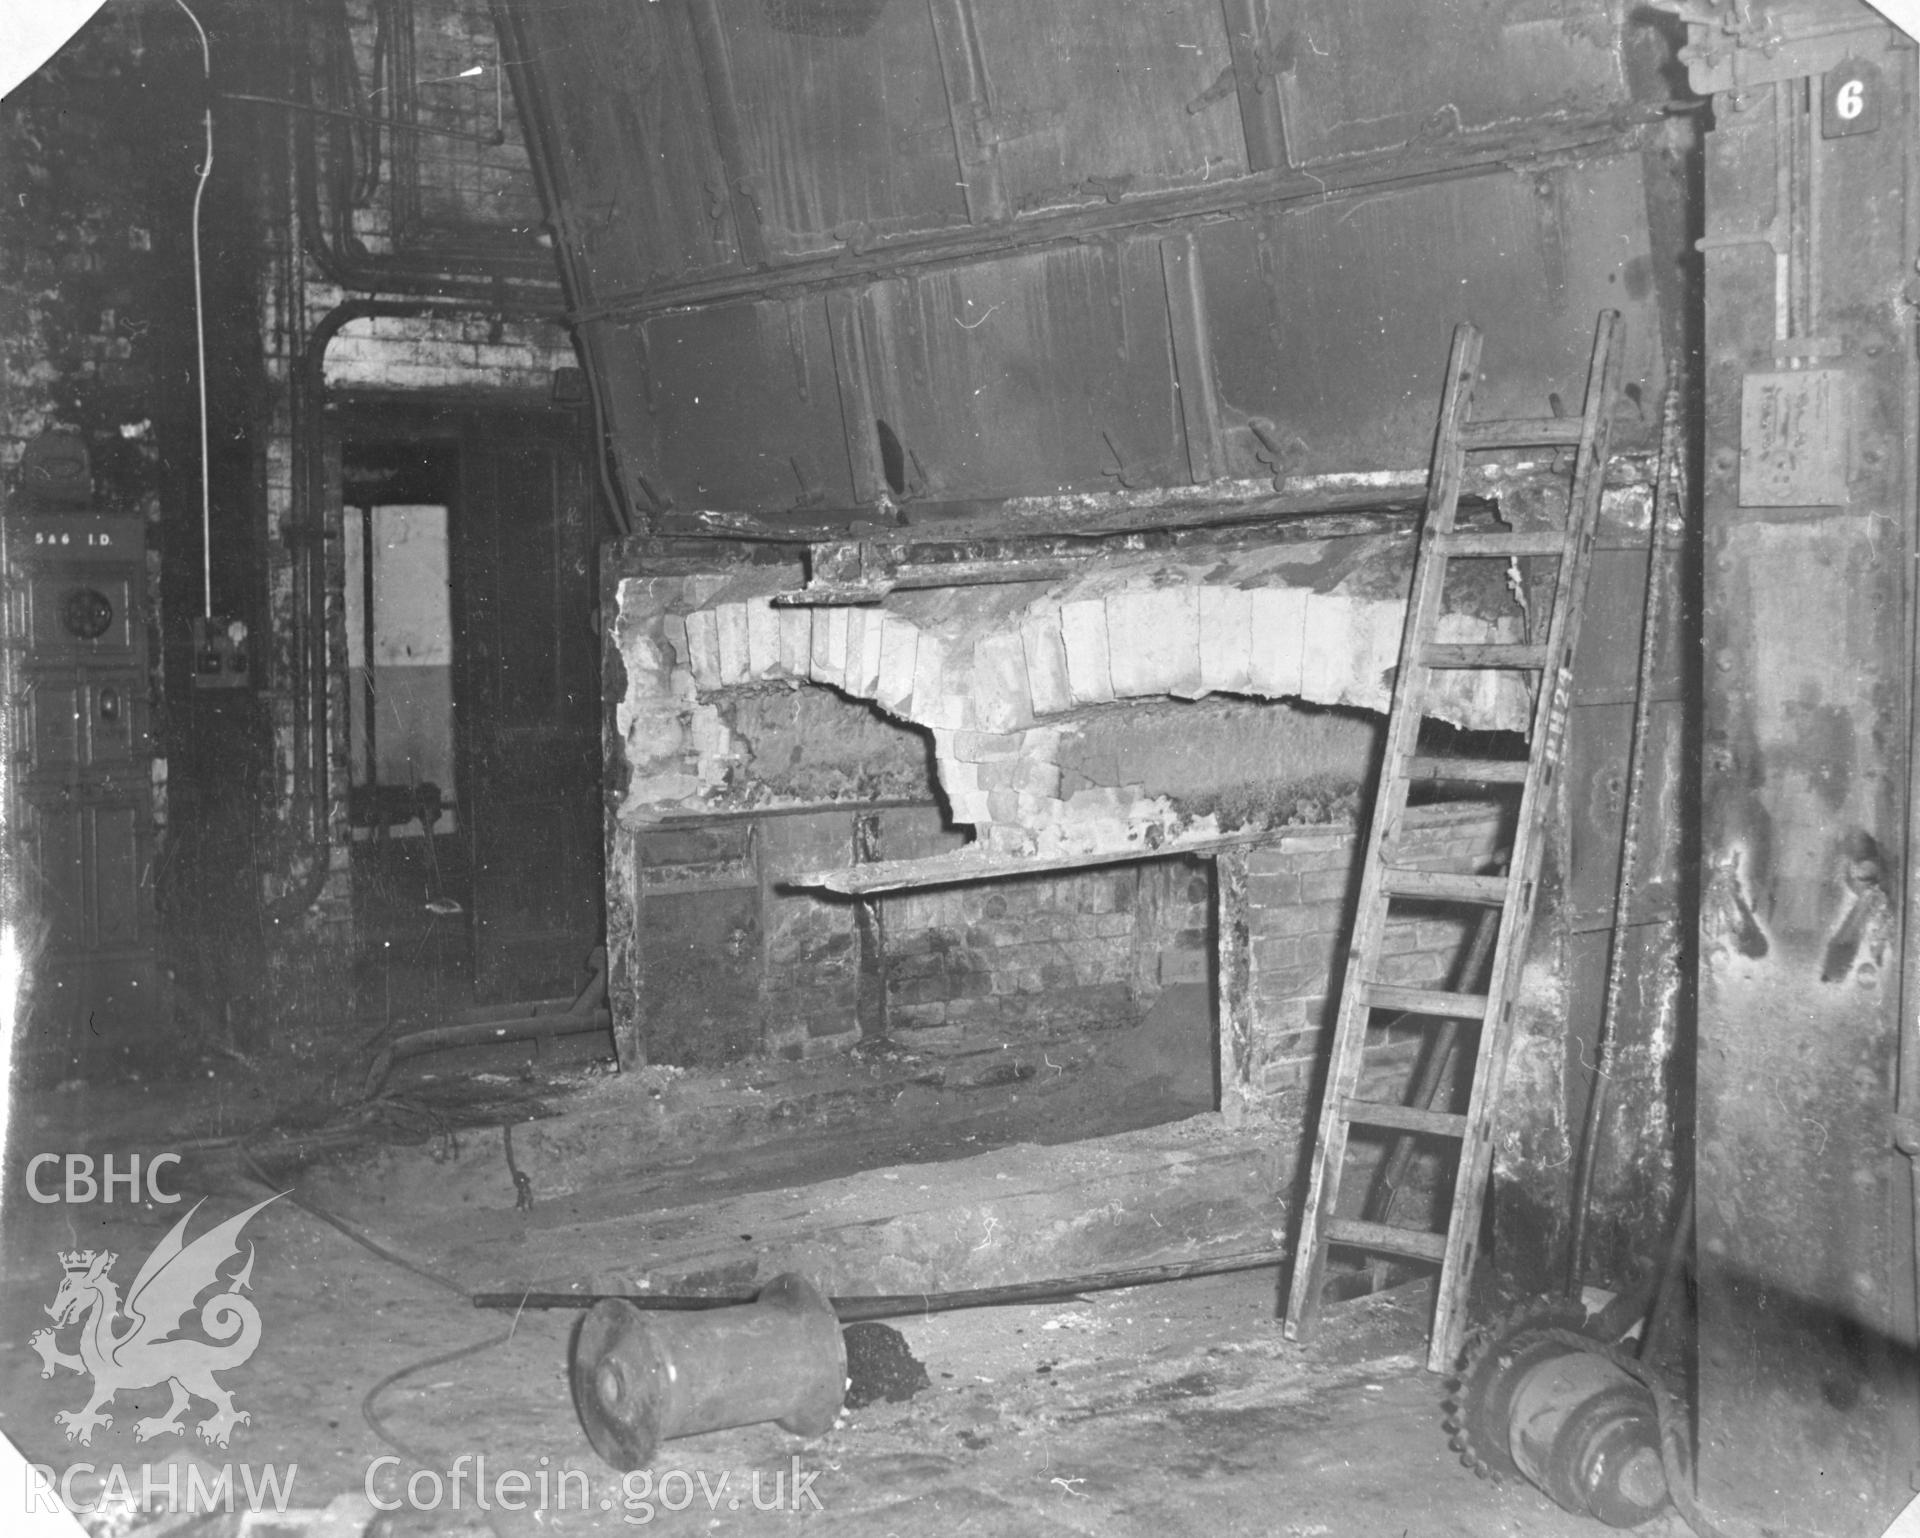 Black and white acetate negative showing interior view of an unidentified industrial site in or near Llanelli.